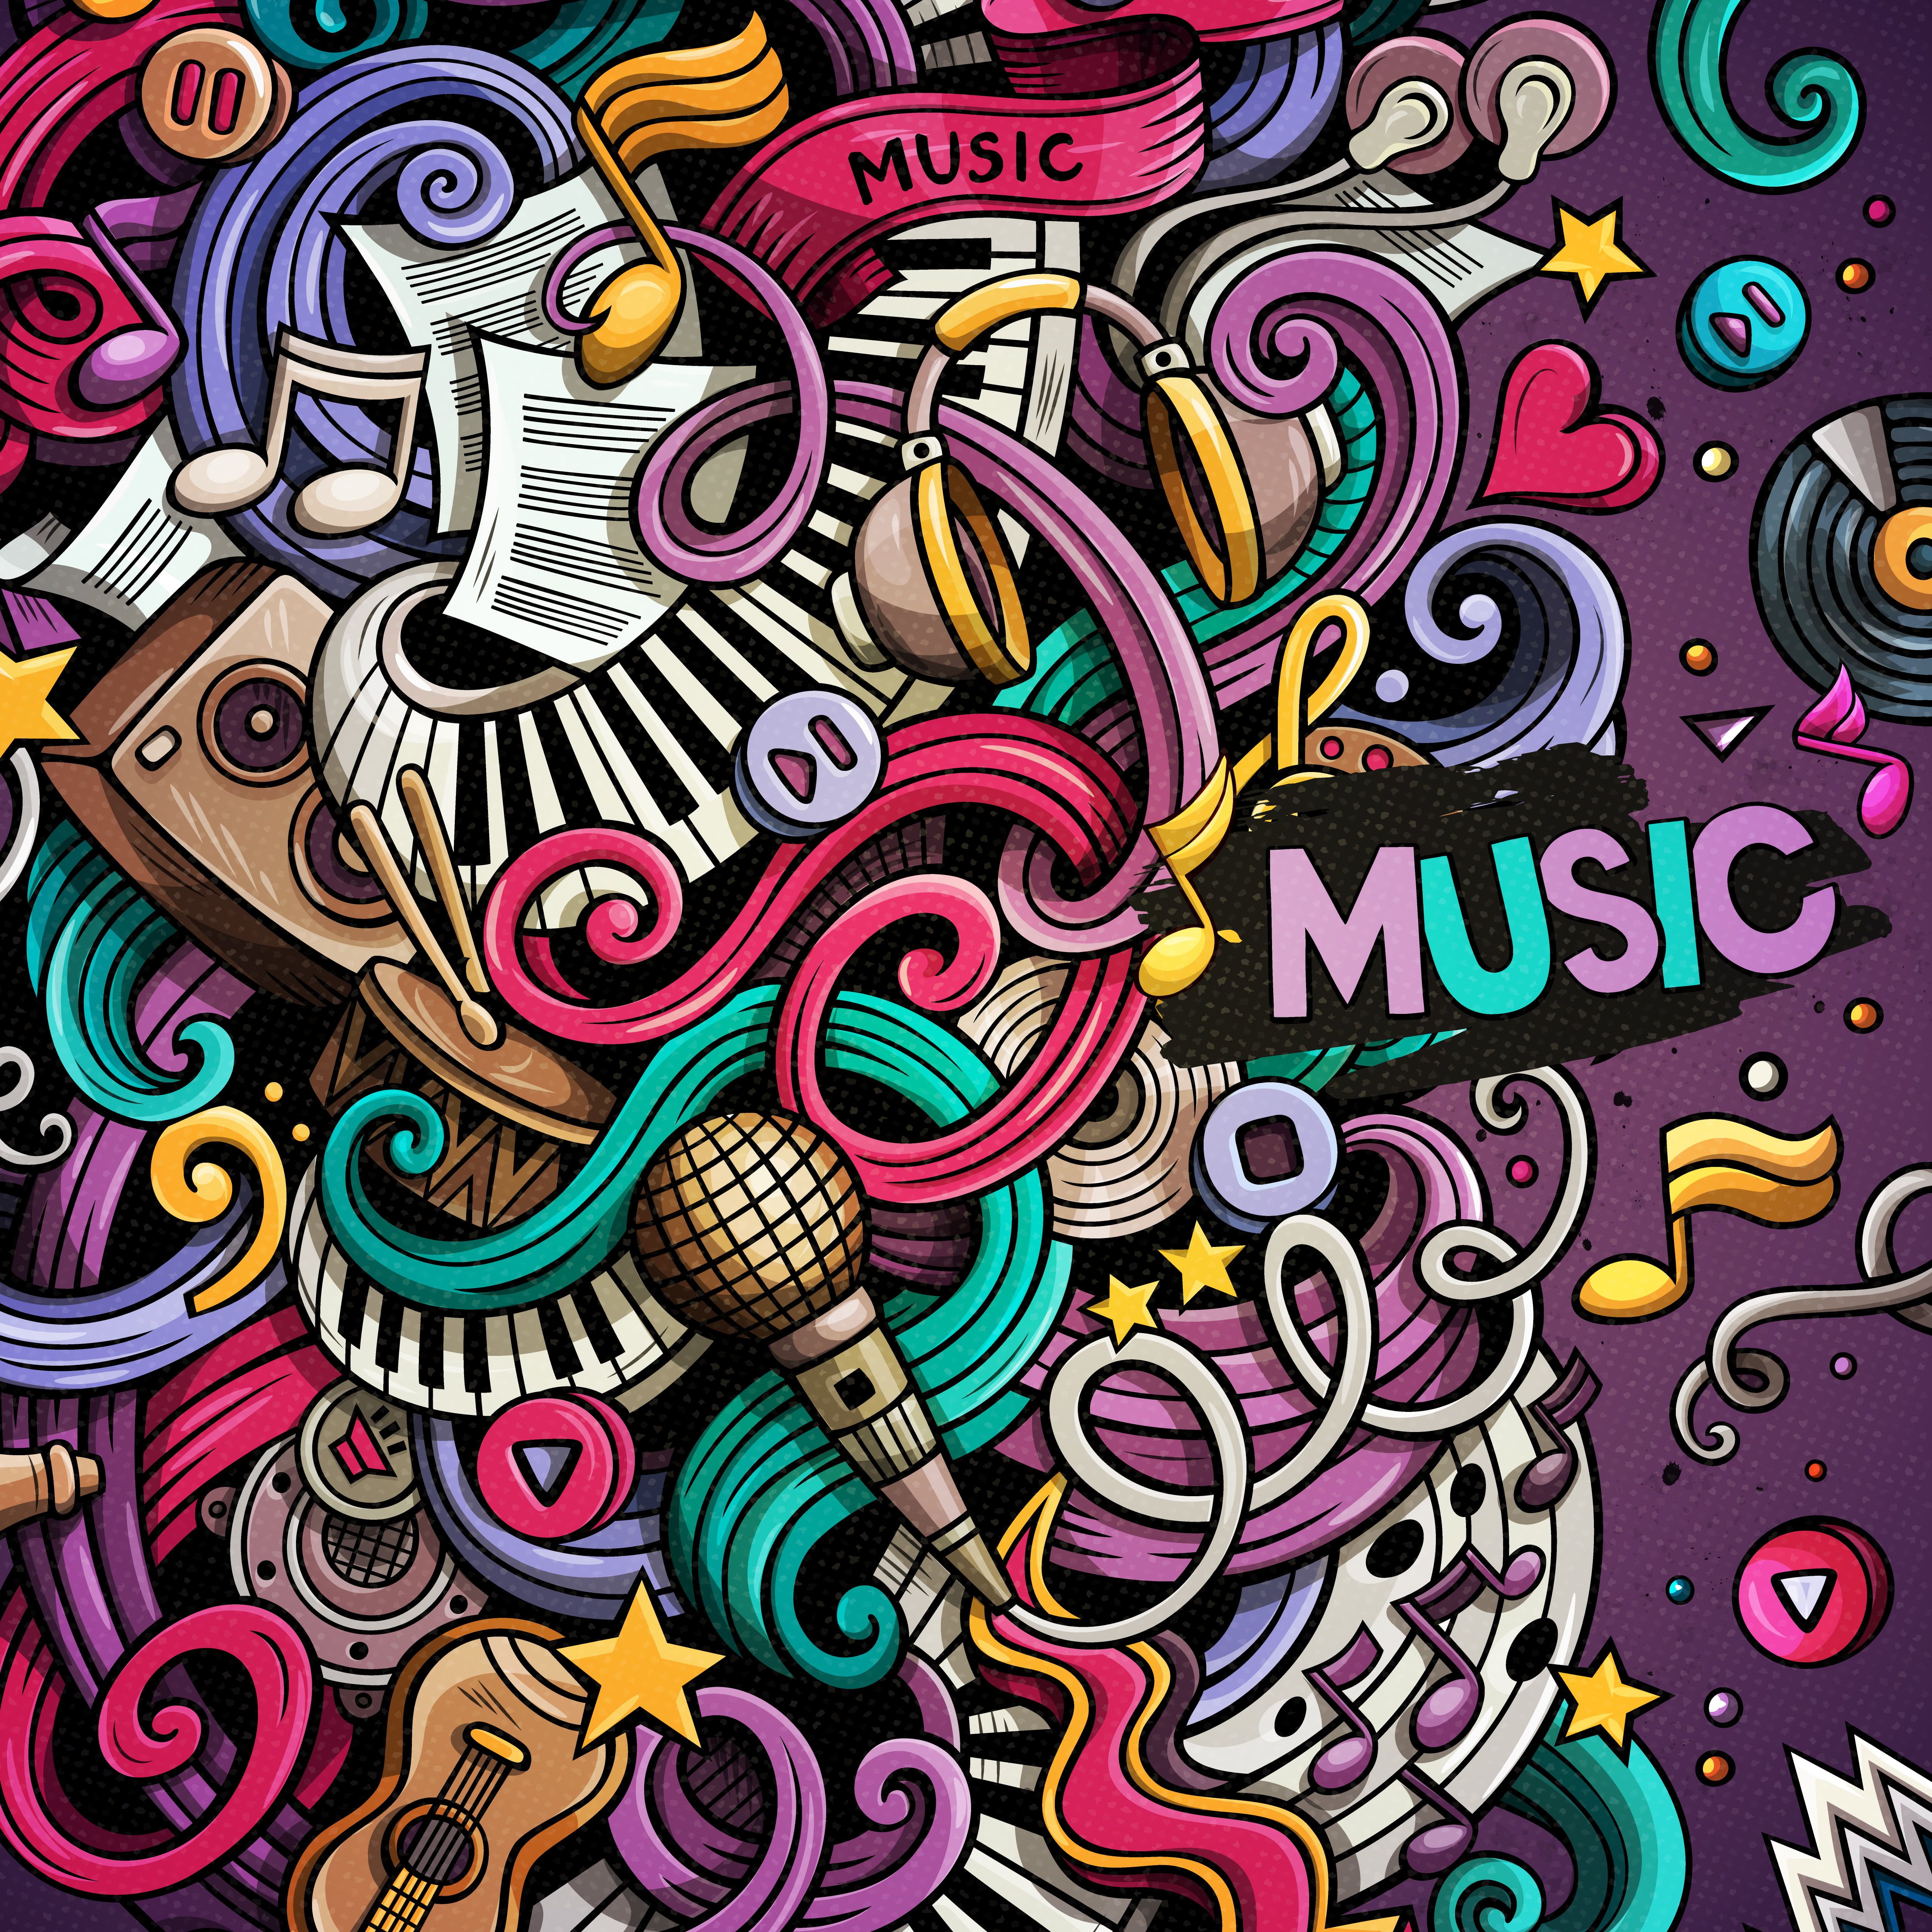 Assorted Color Instrument Collage Artwork #music #doodles #colorful Musical Instruments #patterns K #wallpaper. Music Doodle, Collage Artwork, Music Wallpaper